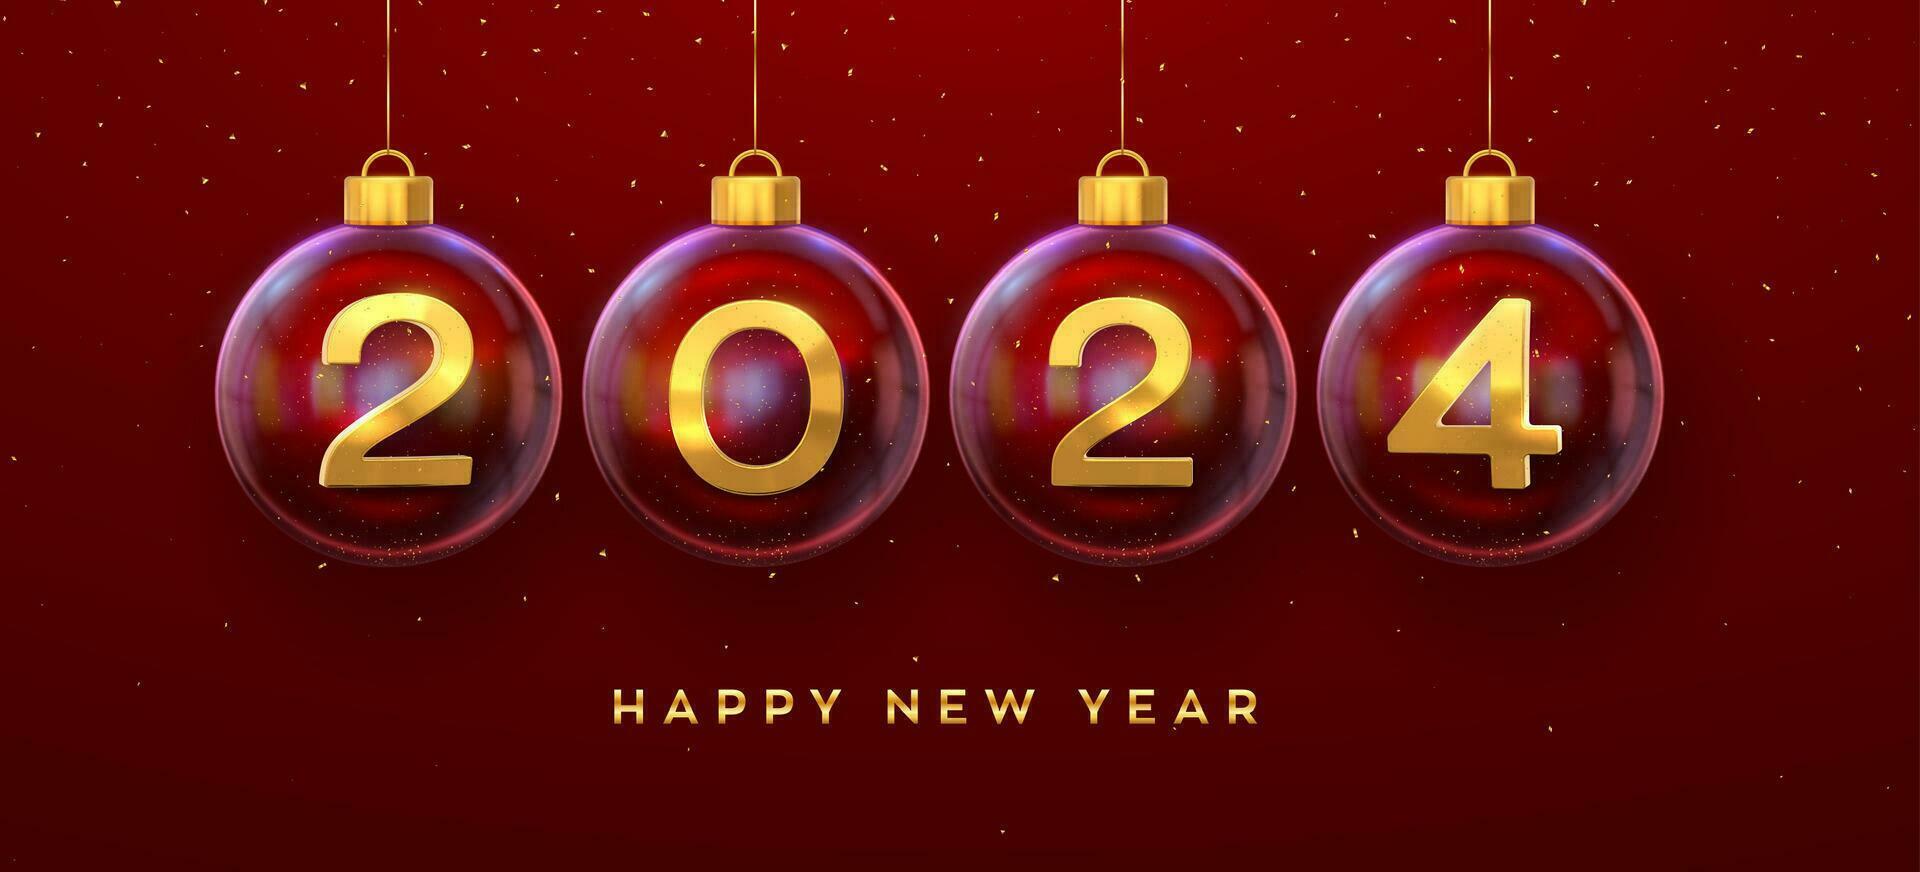 Happy New Year 2024. Golden metal 3D numbers 2024 in glass bauble. Hanging Christmas balls and glitter confetti. Greeting card. Holiday Xmas and New Year poster, banner, flyer. Vector Illustration.